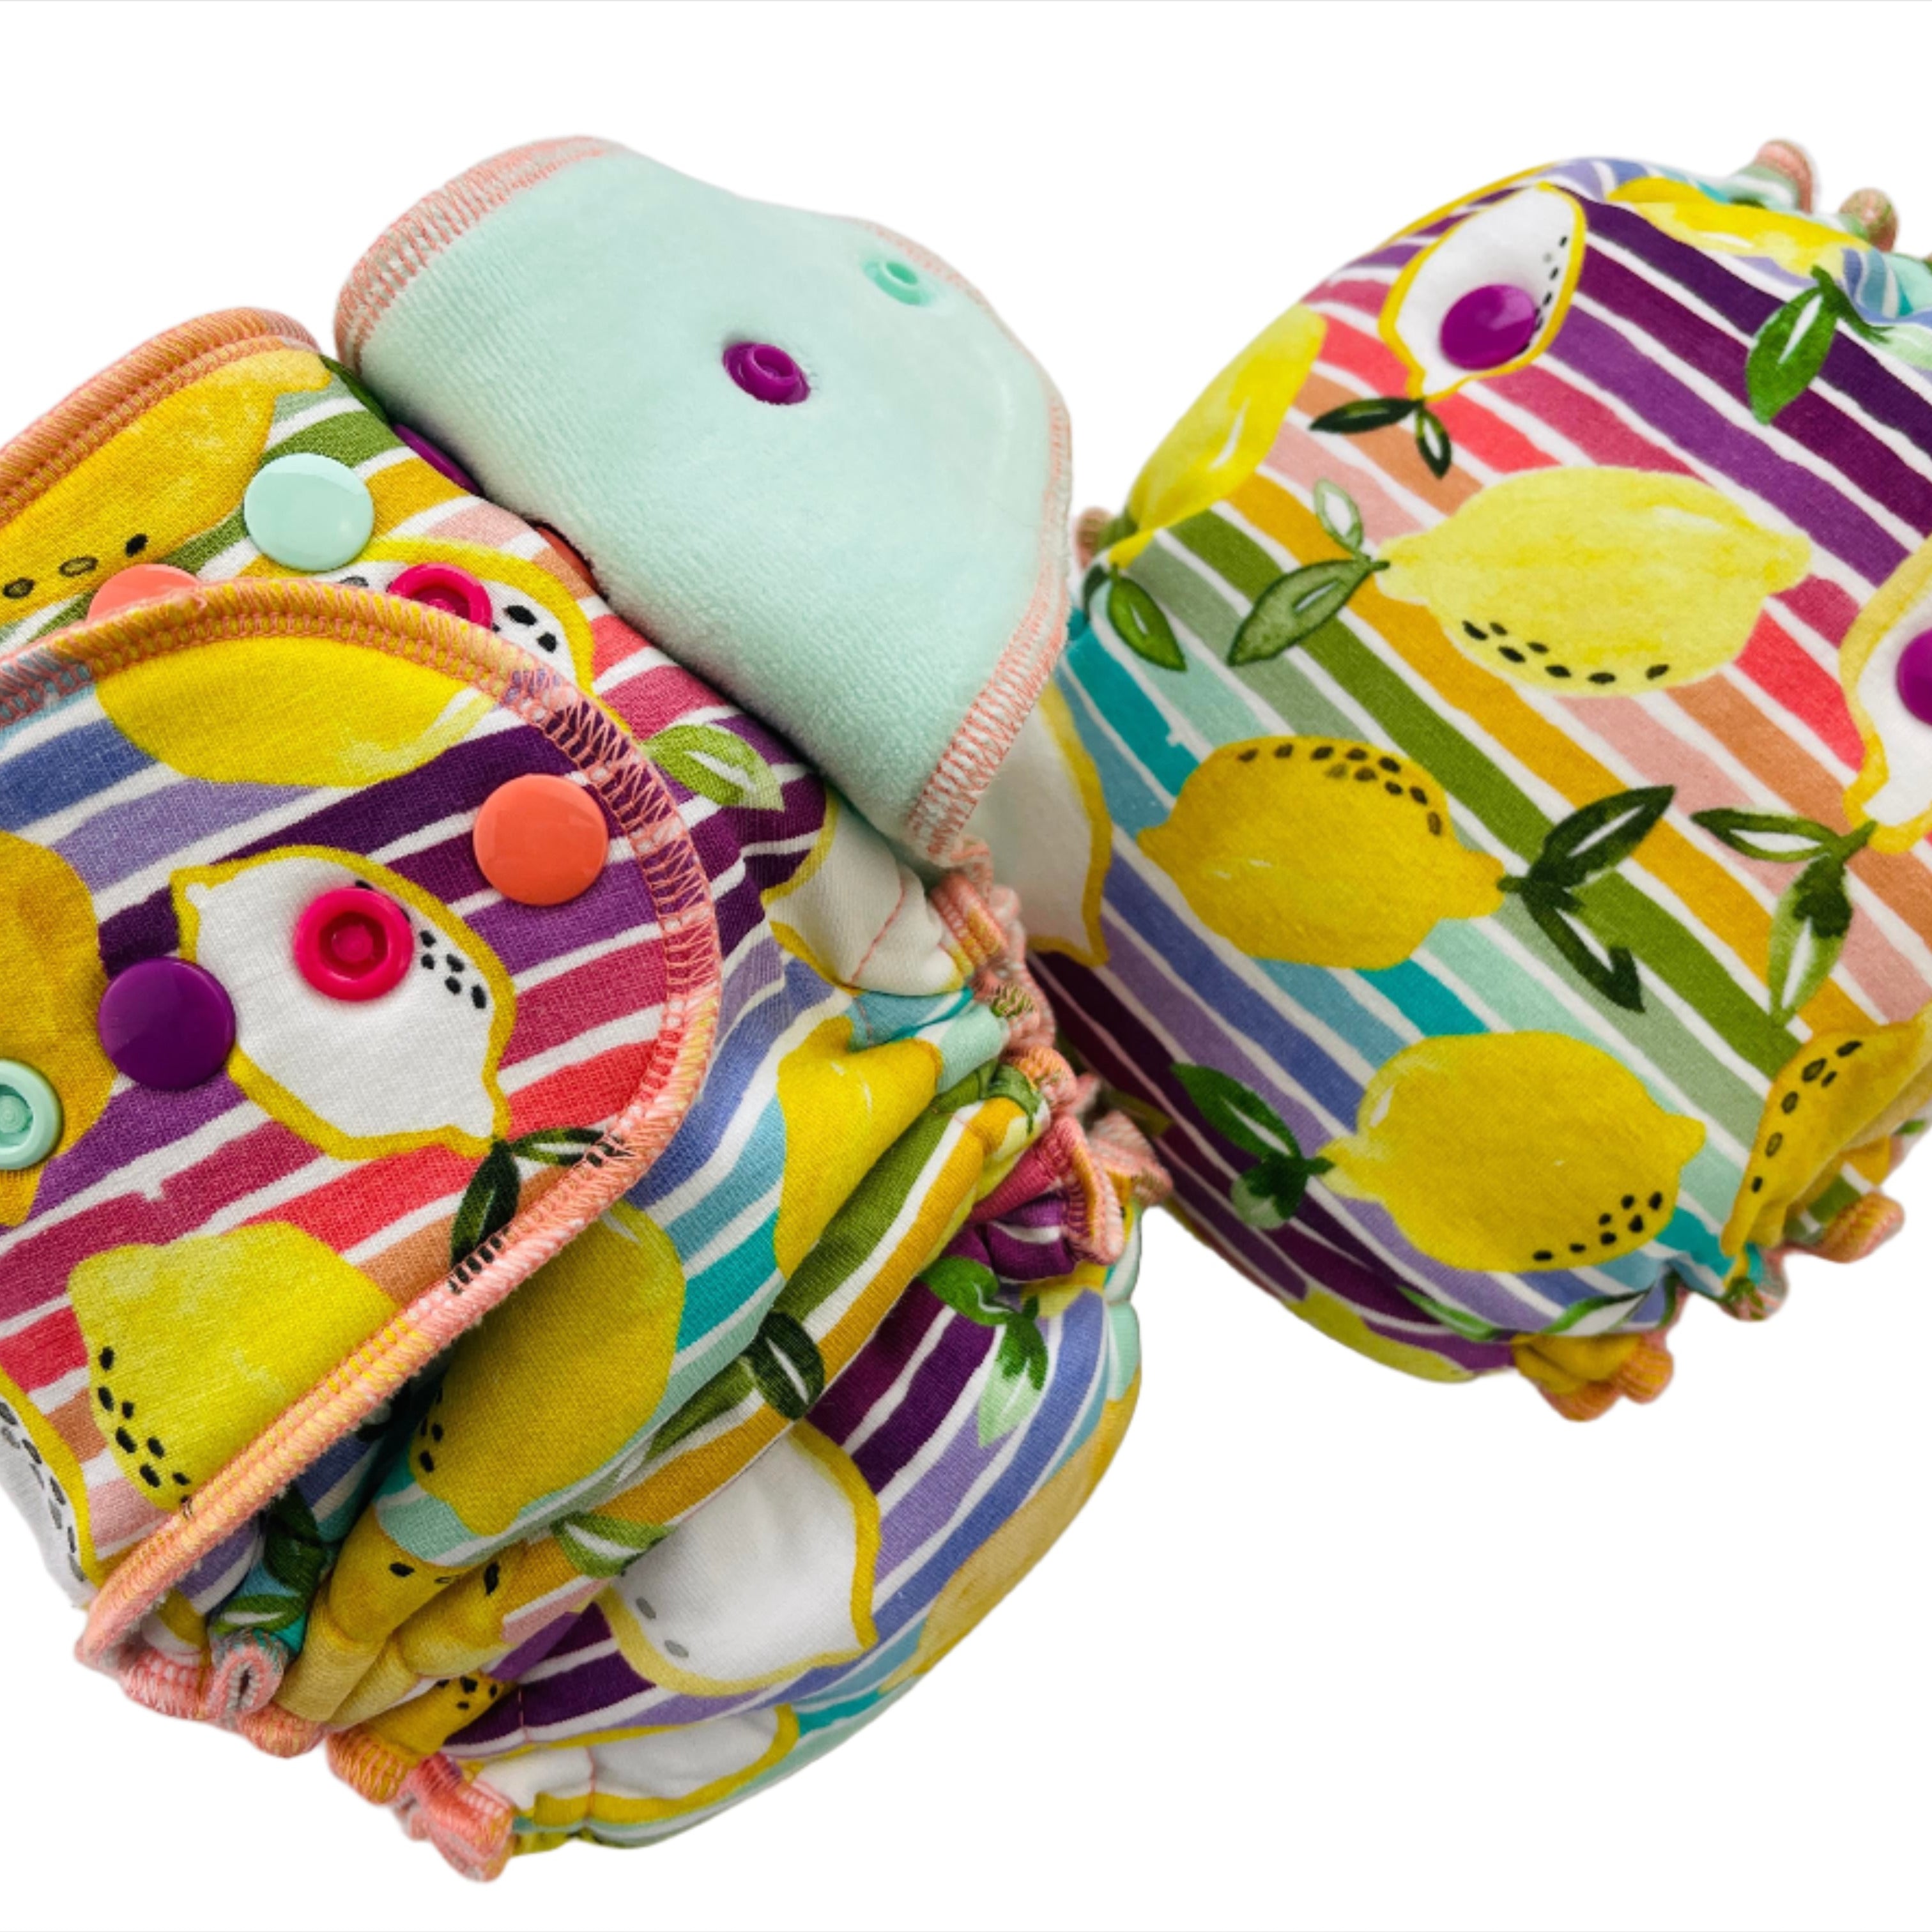 Lilly & Frank One Size Cloth Diaper Rainbow Lemons One Size Cloth Diaper - Fitted - Serged